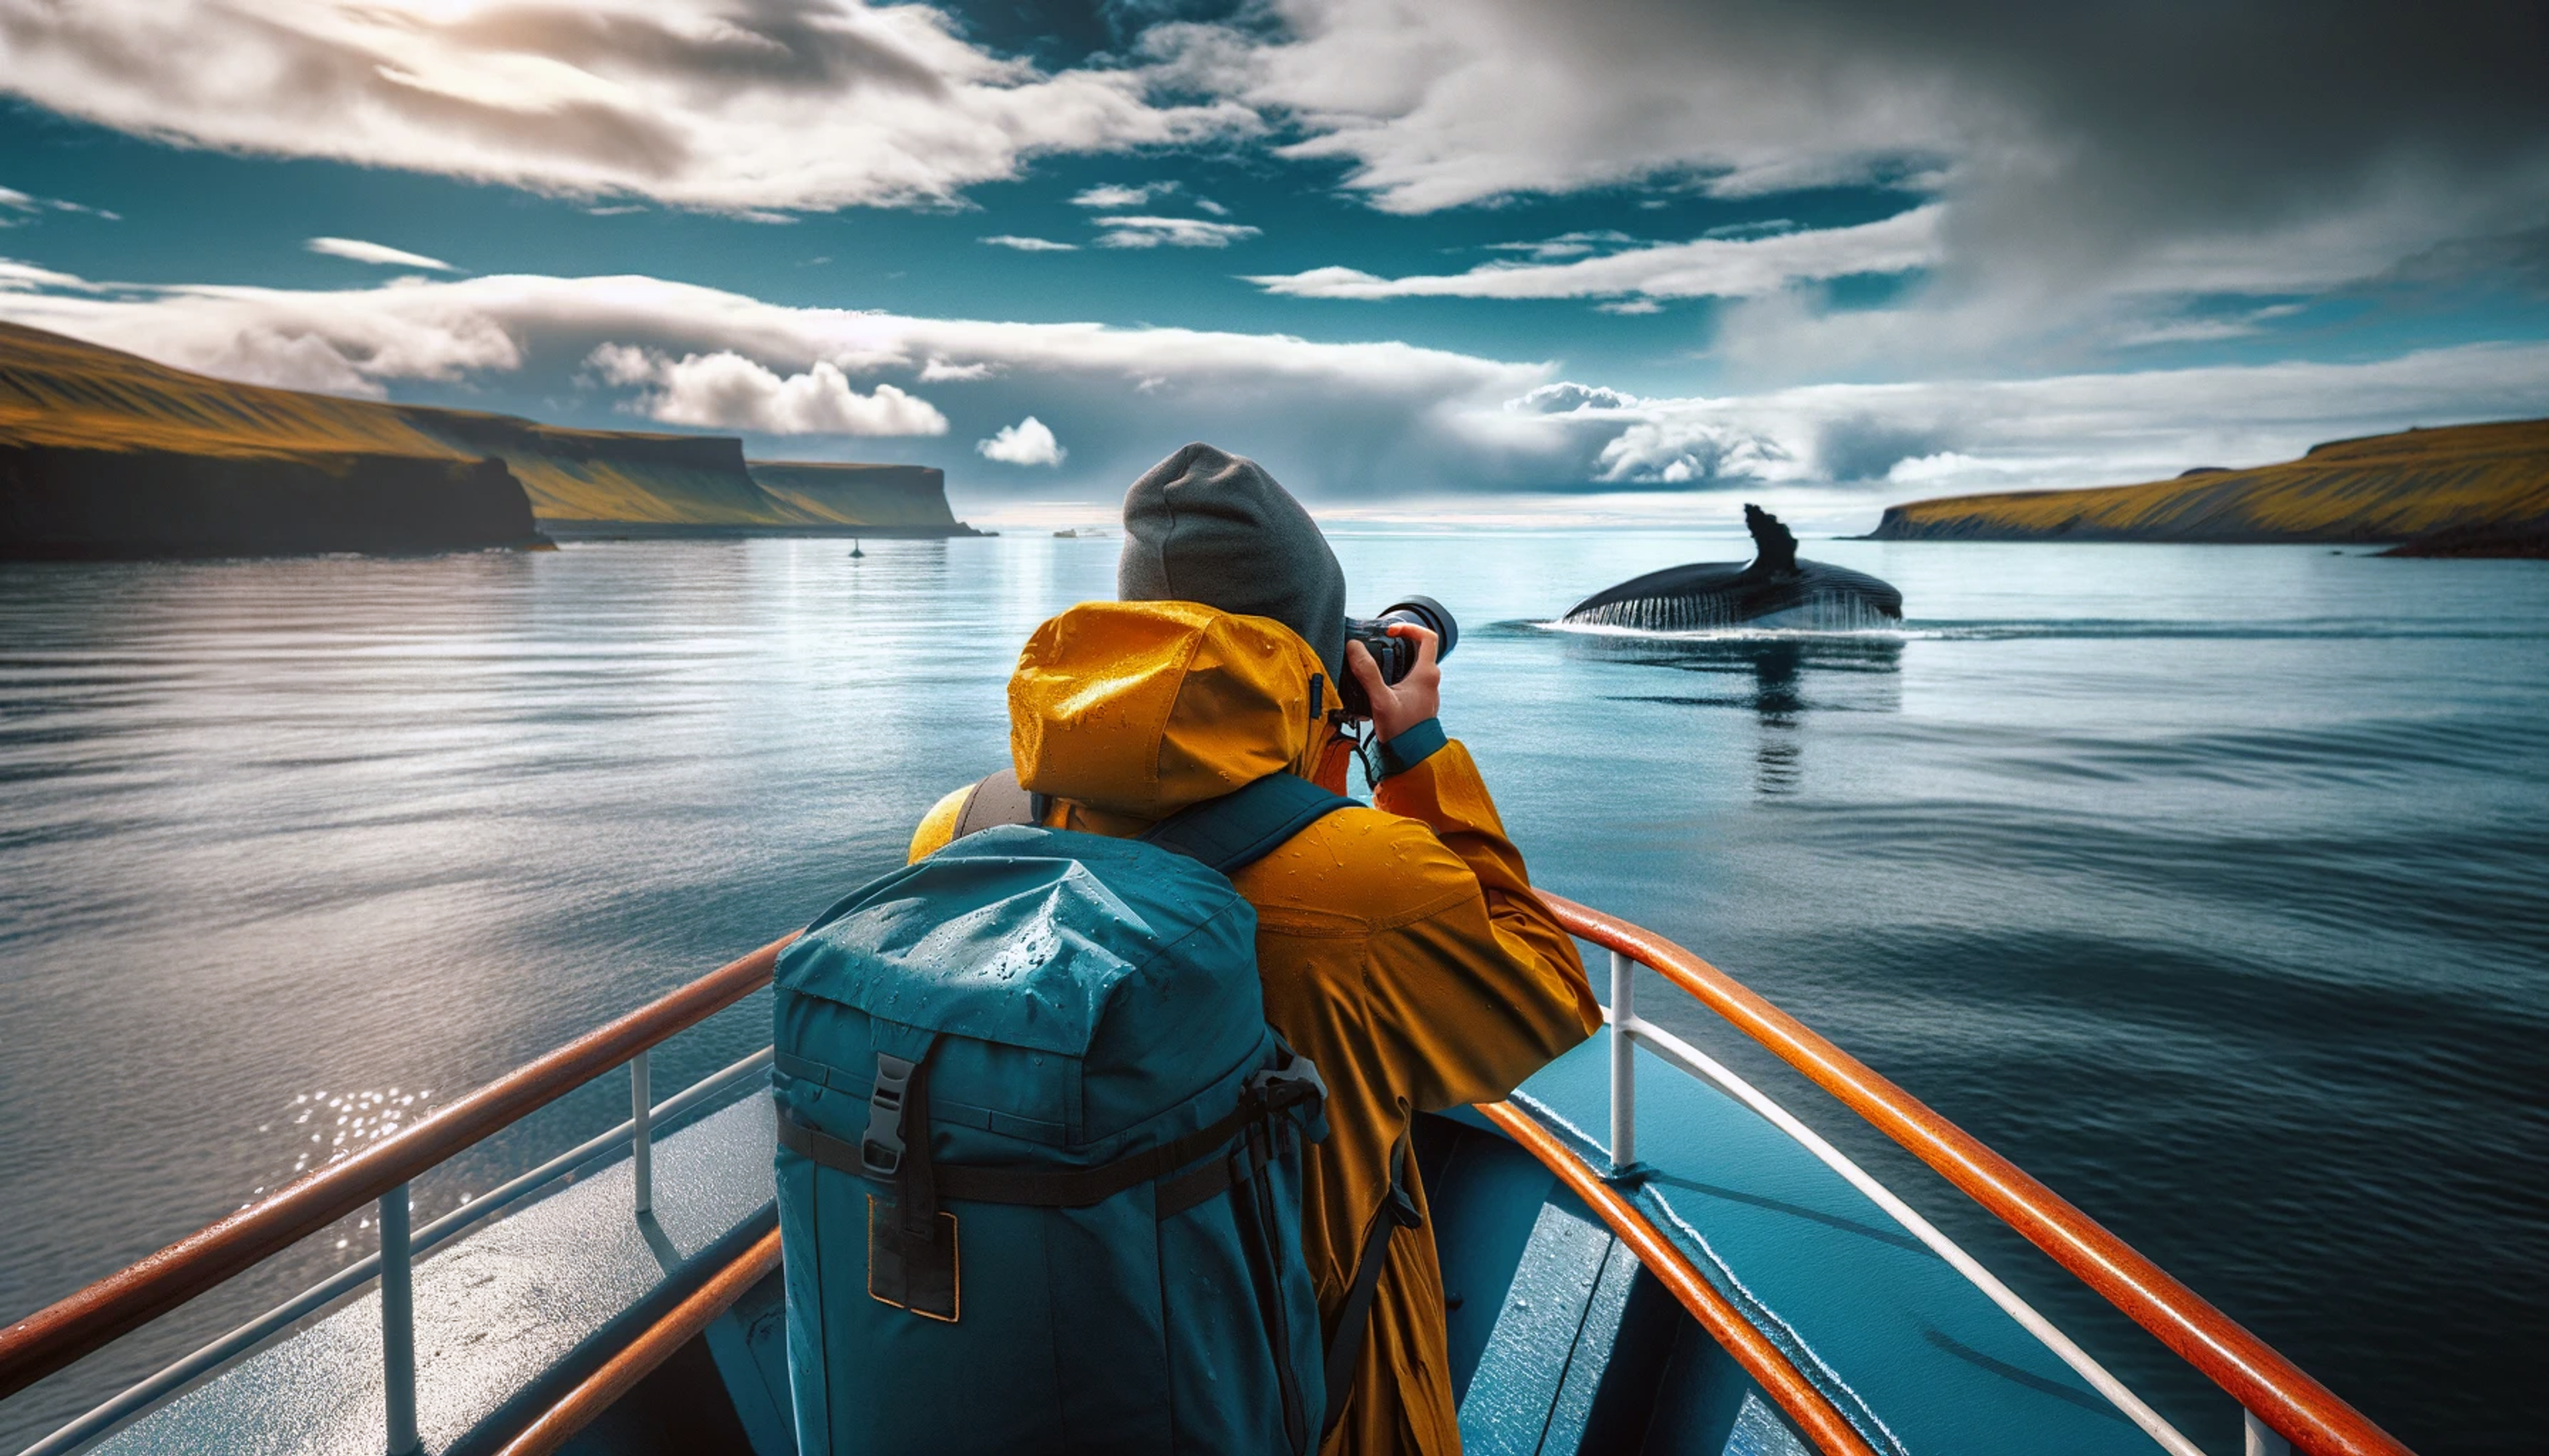 finding a sperm whales on a boat tour in the icelandic waters in a summer trip